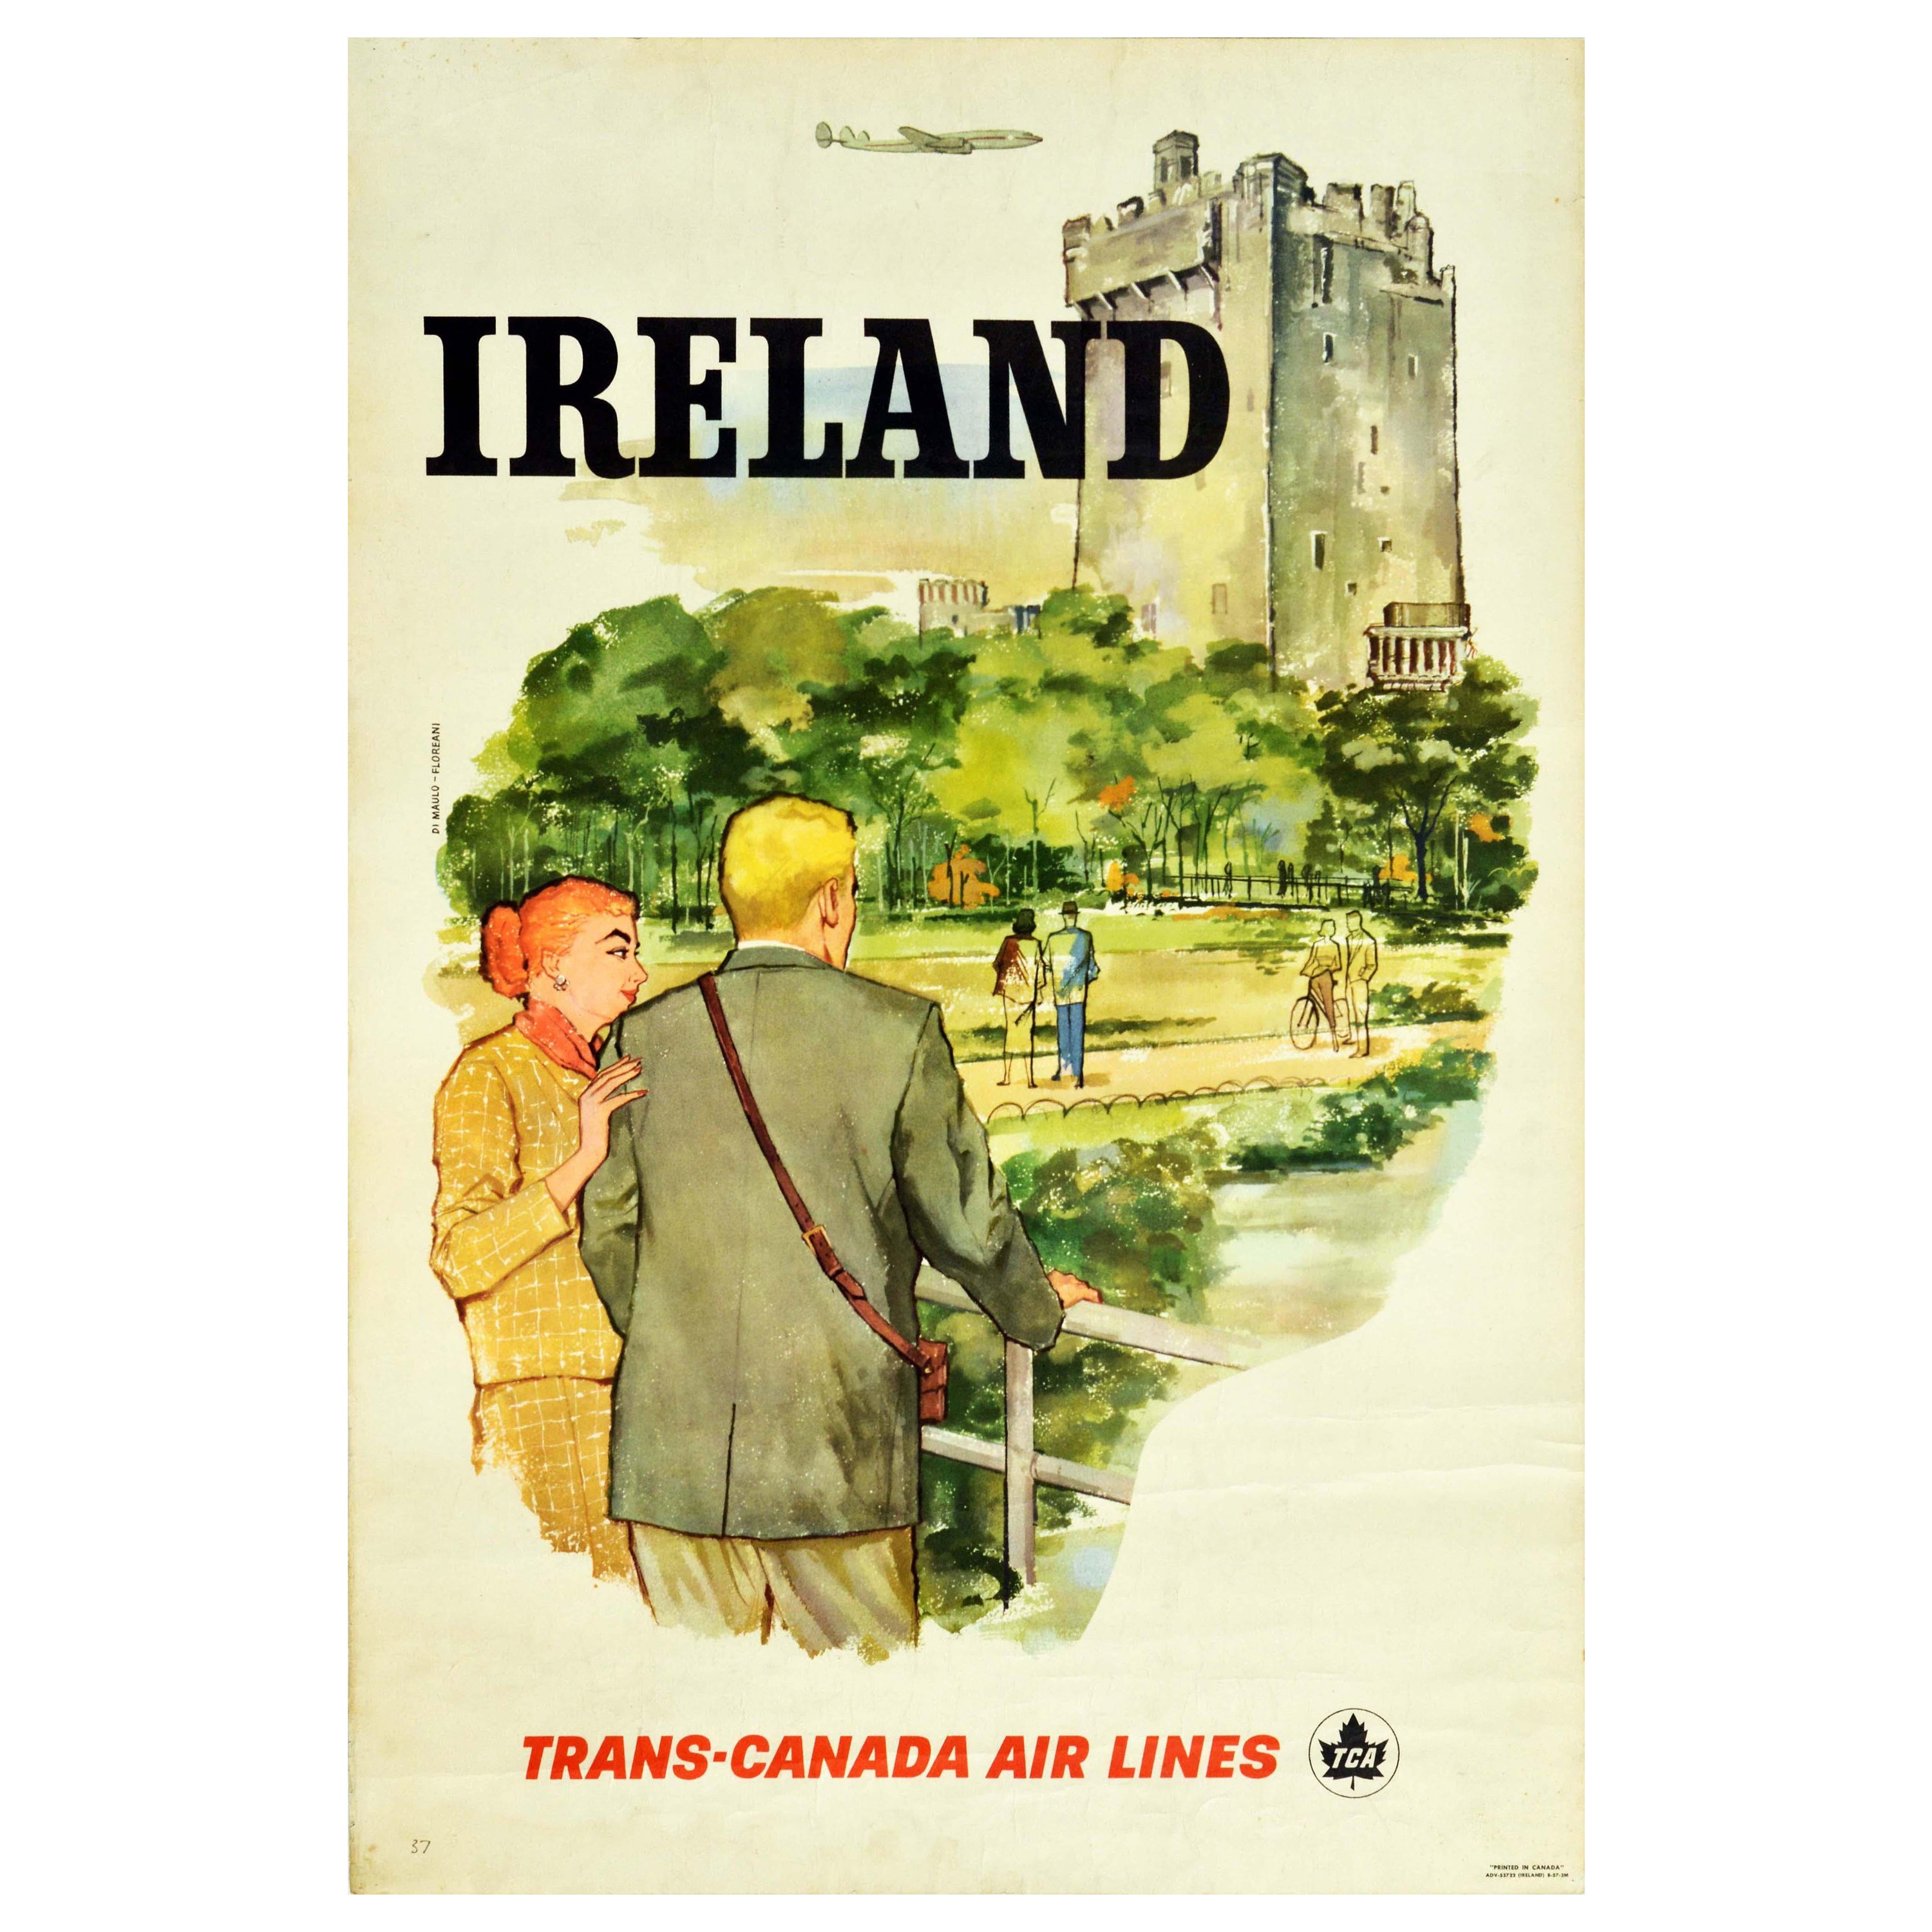 Details about   Ireland 1950 The Emerald Isle Vintage Poster Print Travel Castles Cottages 